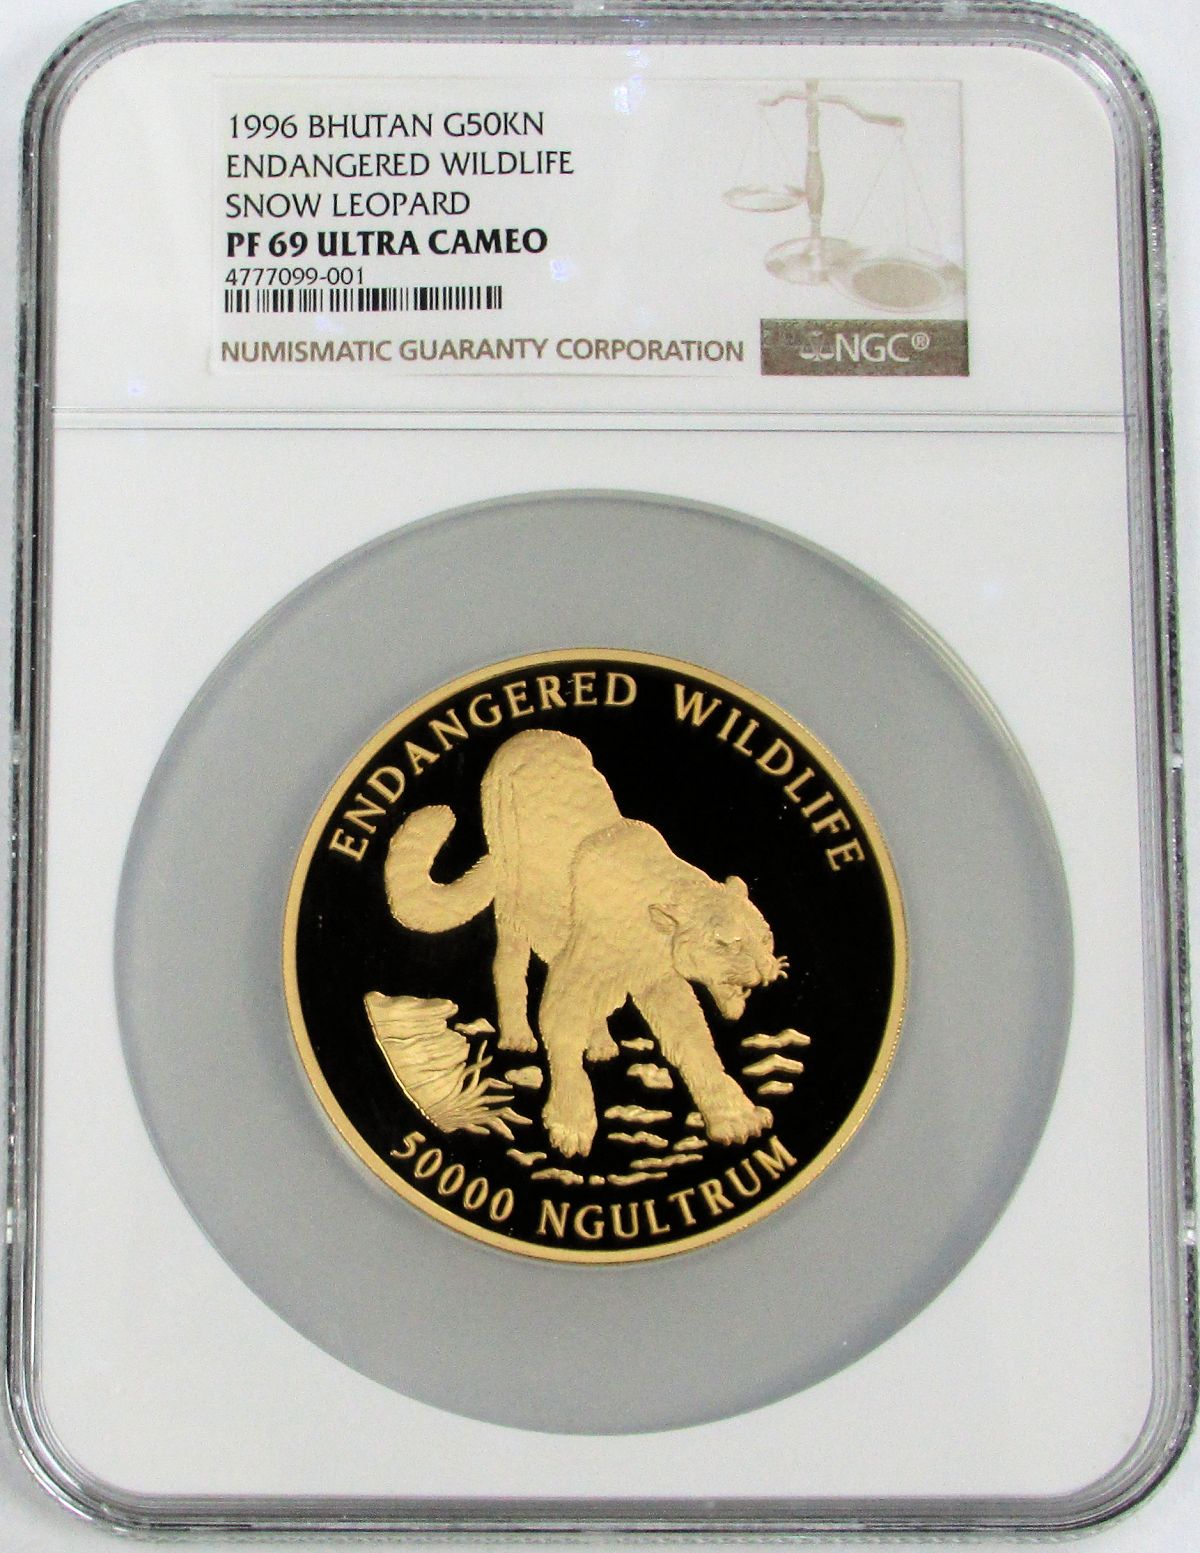 1996 GOLD BHUTAN 5oz 50000 NGULTRUMS LEOPARD NGC PROOF 69 ULTRA CAMEO 99 MINTED